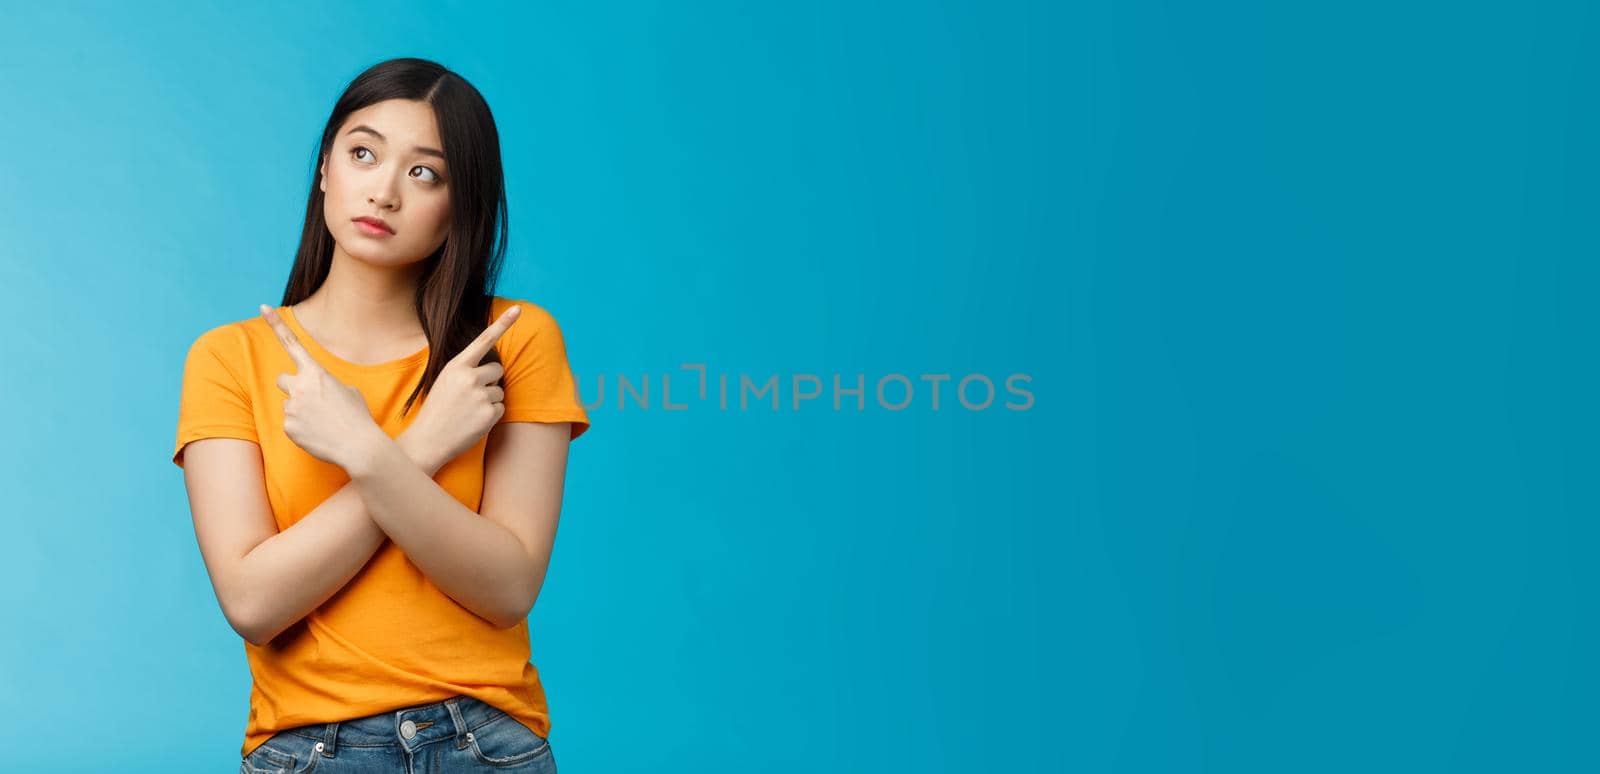 Confused cute asian female student thinking what do, look sideways thoughtful, cross hands chest pointing left and right, making choice, thinking what pick, taking important decision blue background.